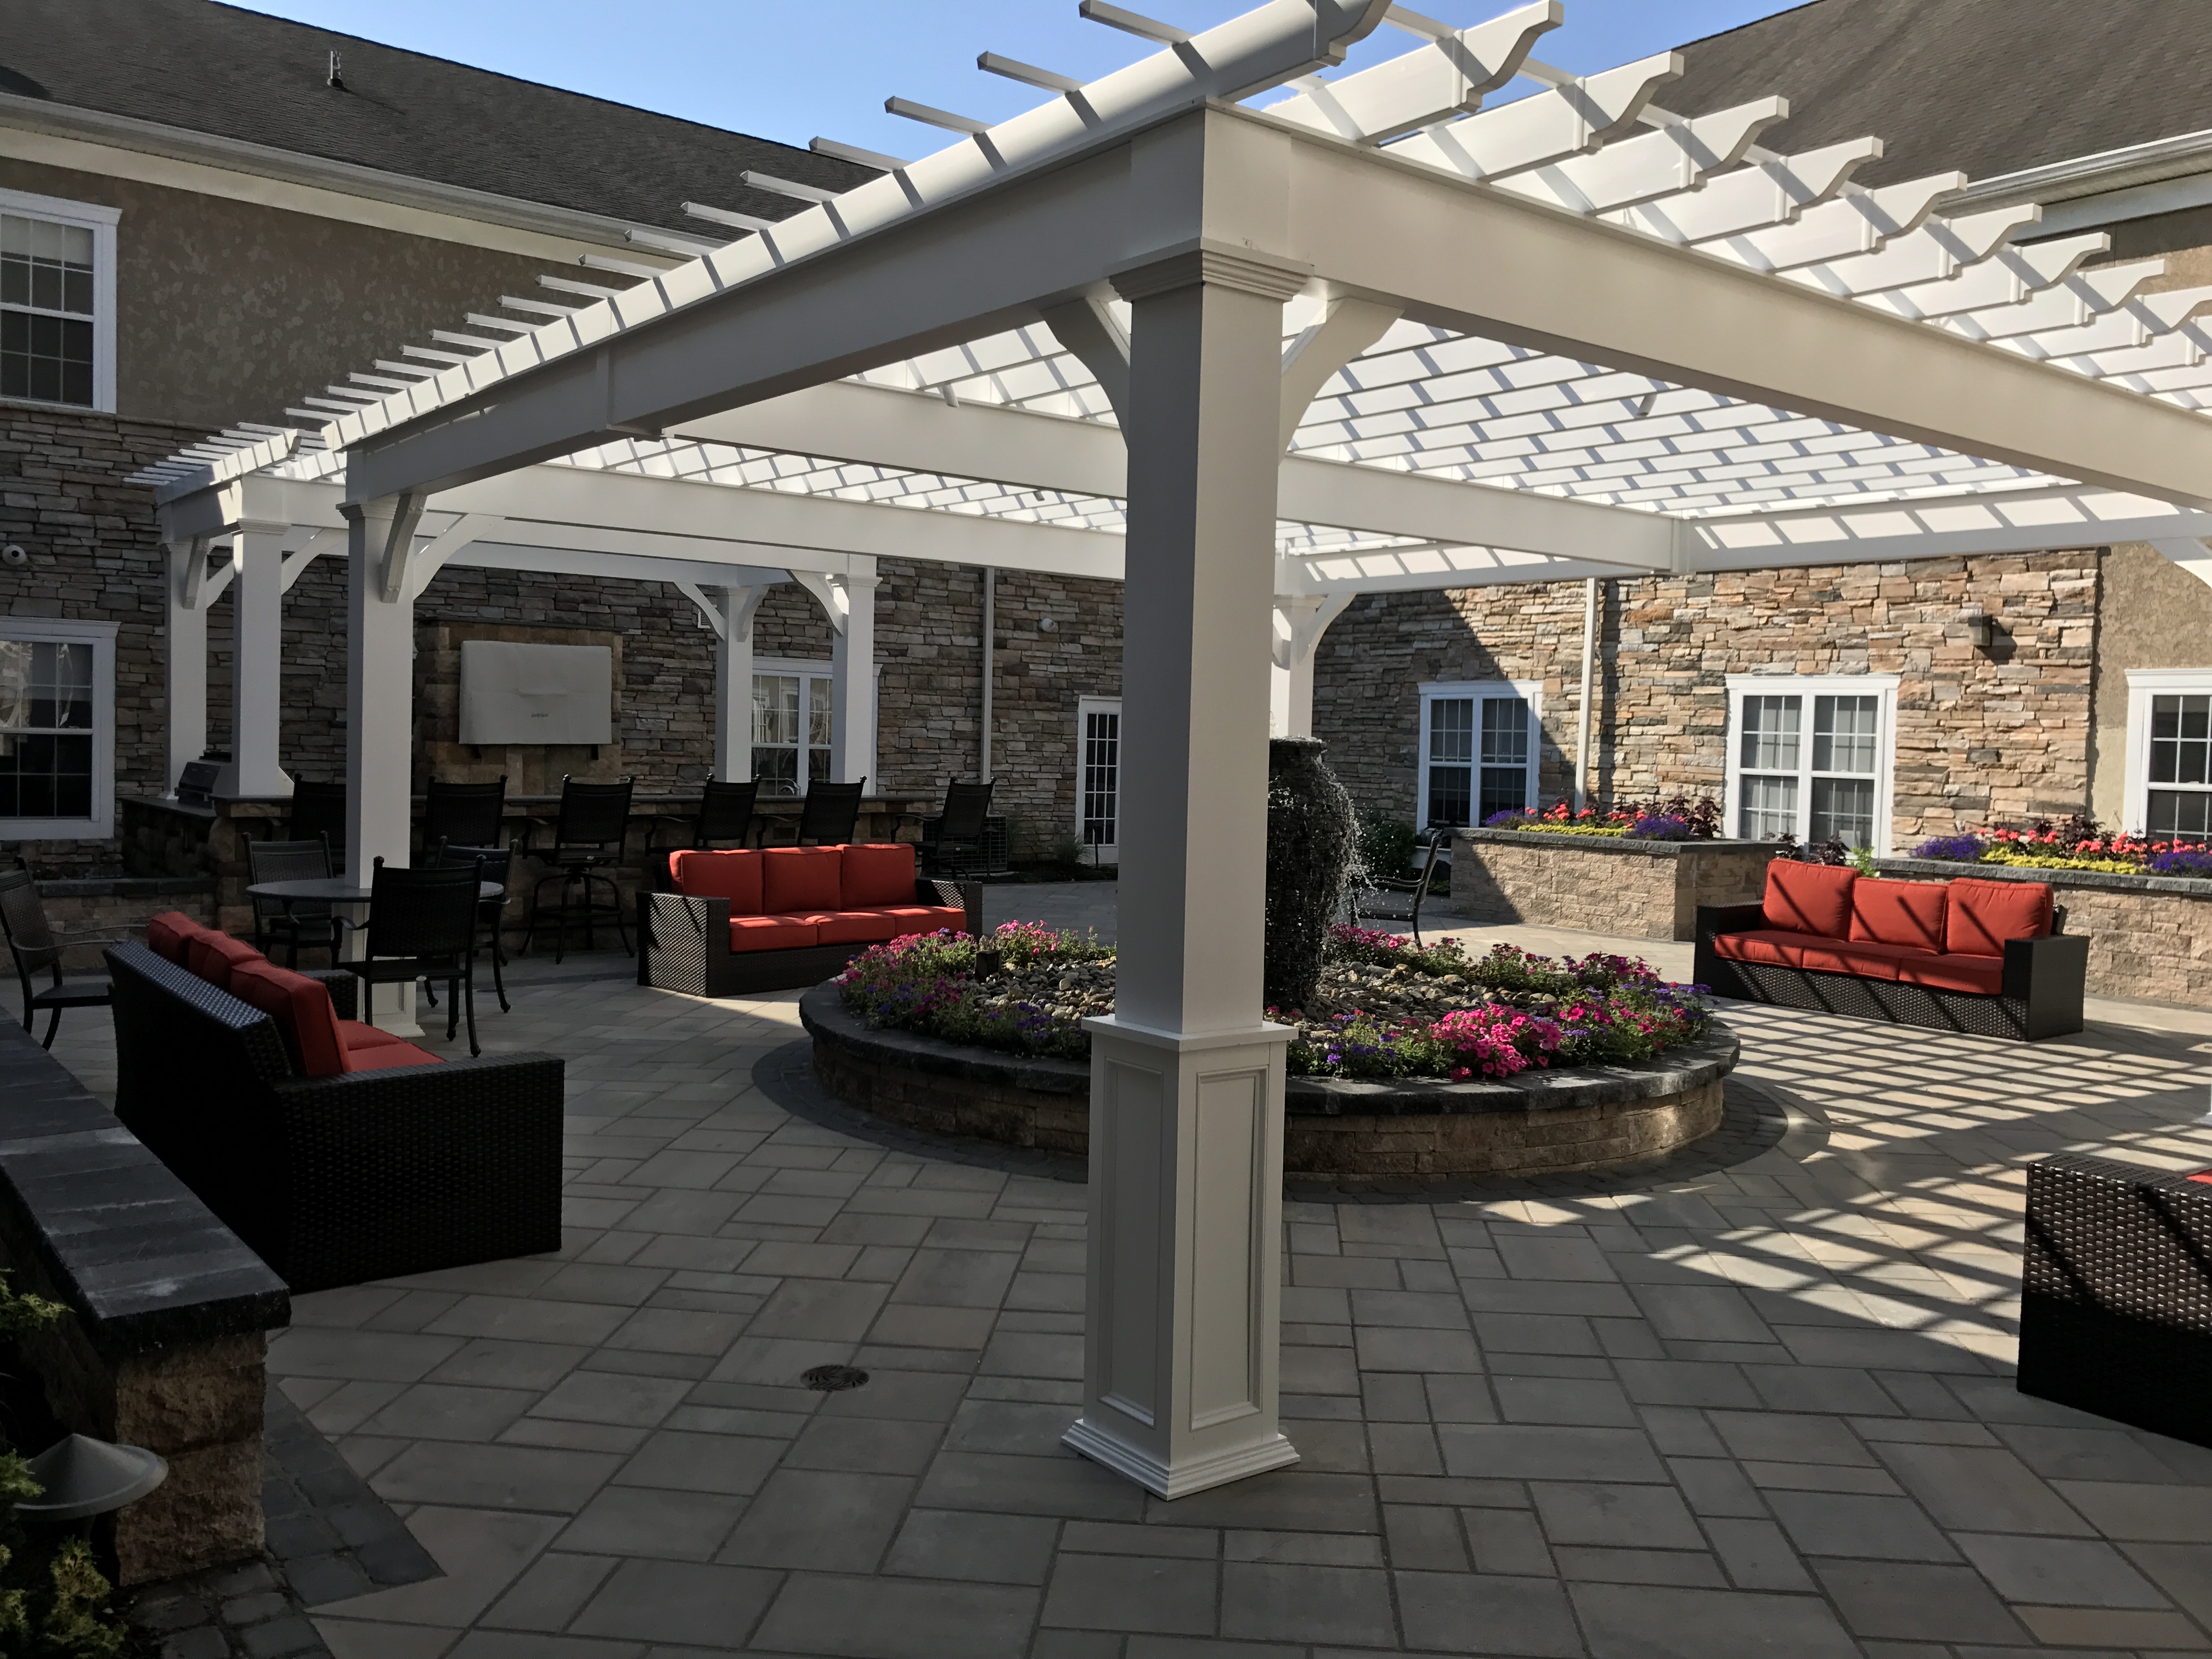 CareOne Assisted Living at Hamilton image